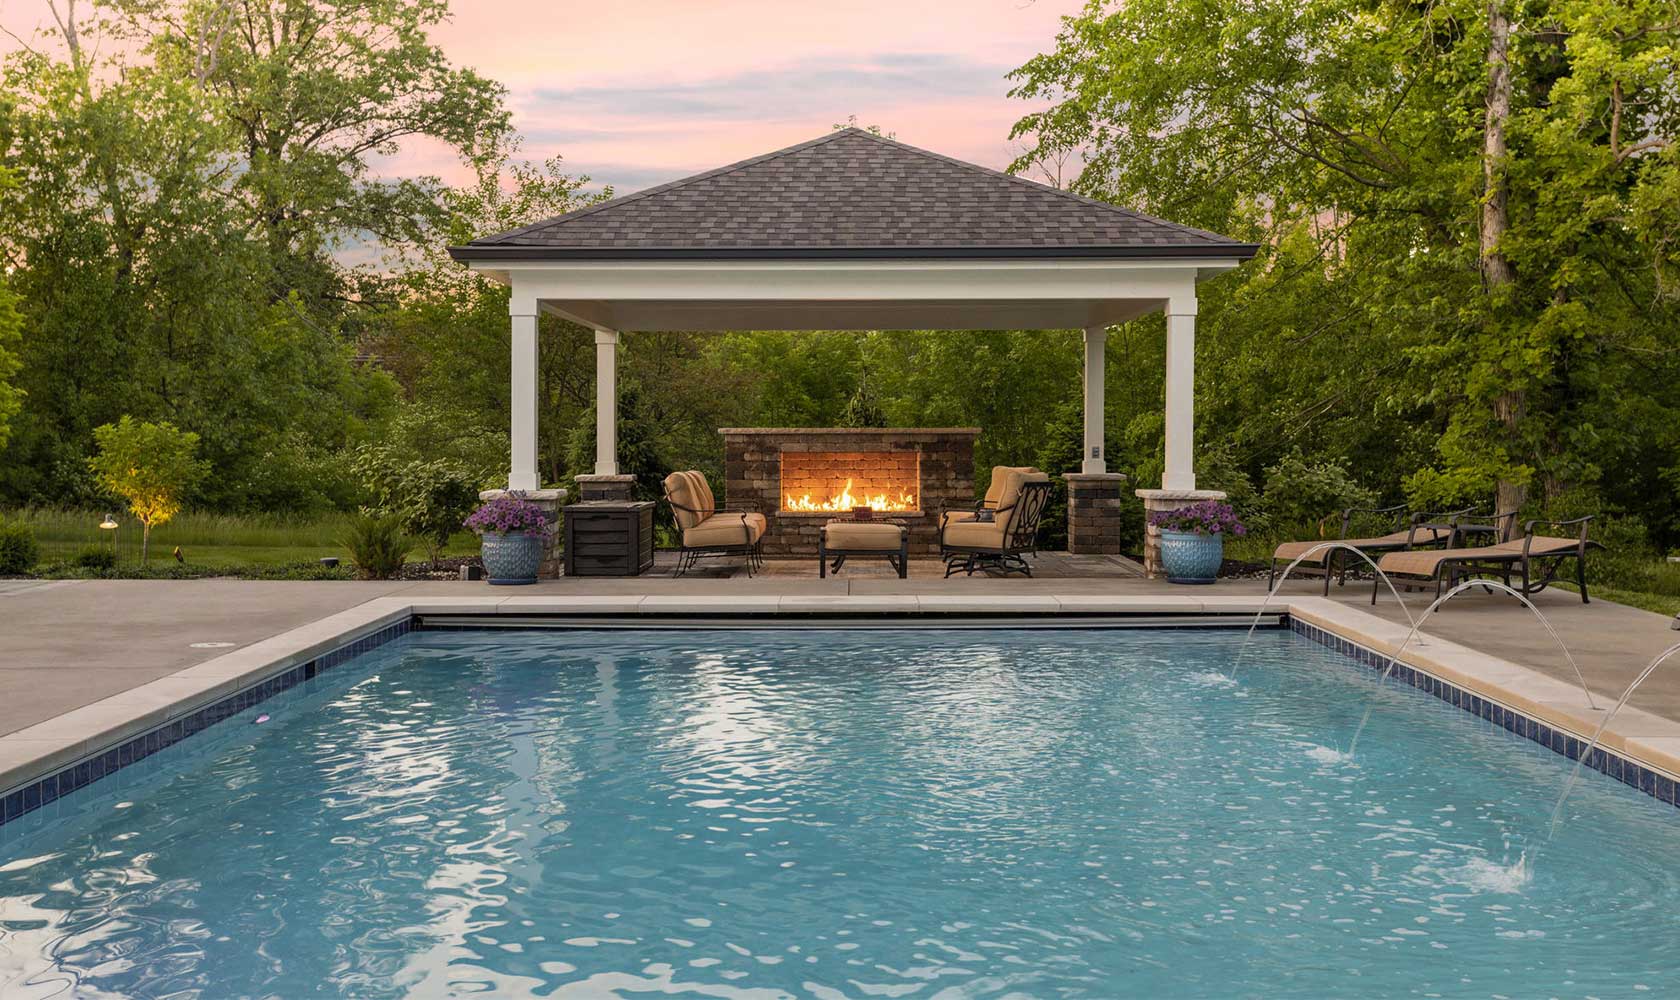 Outdoor entertainment area with cabana